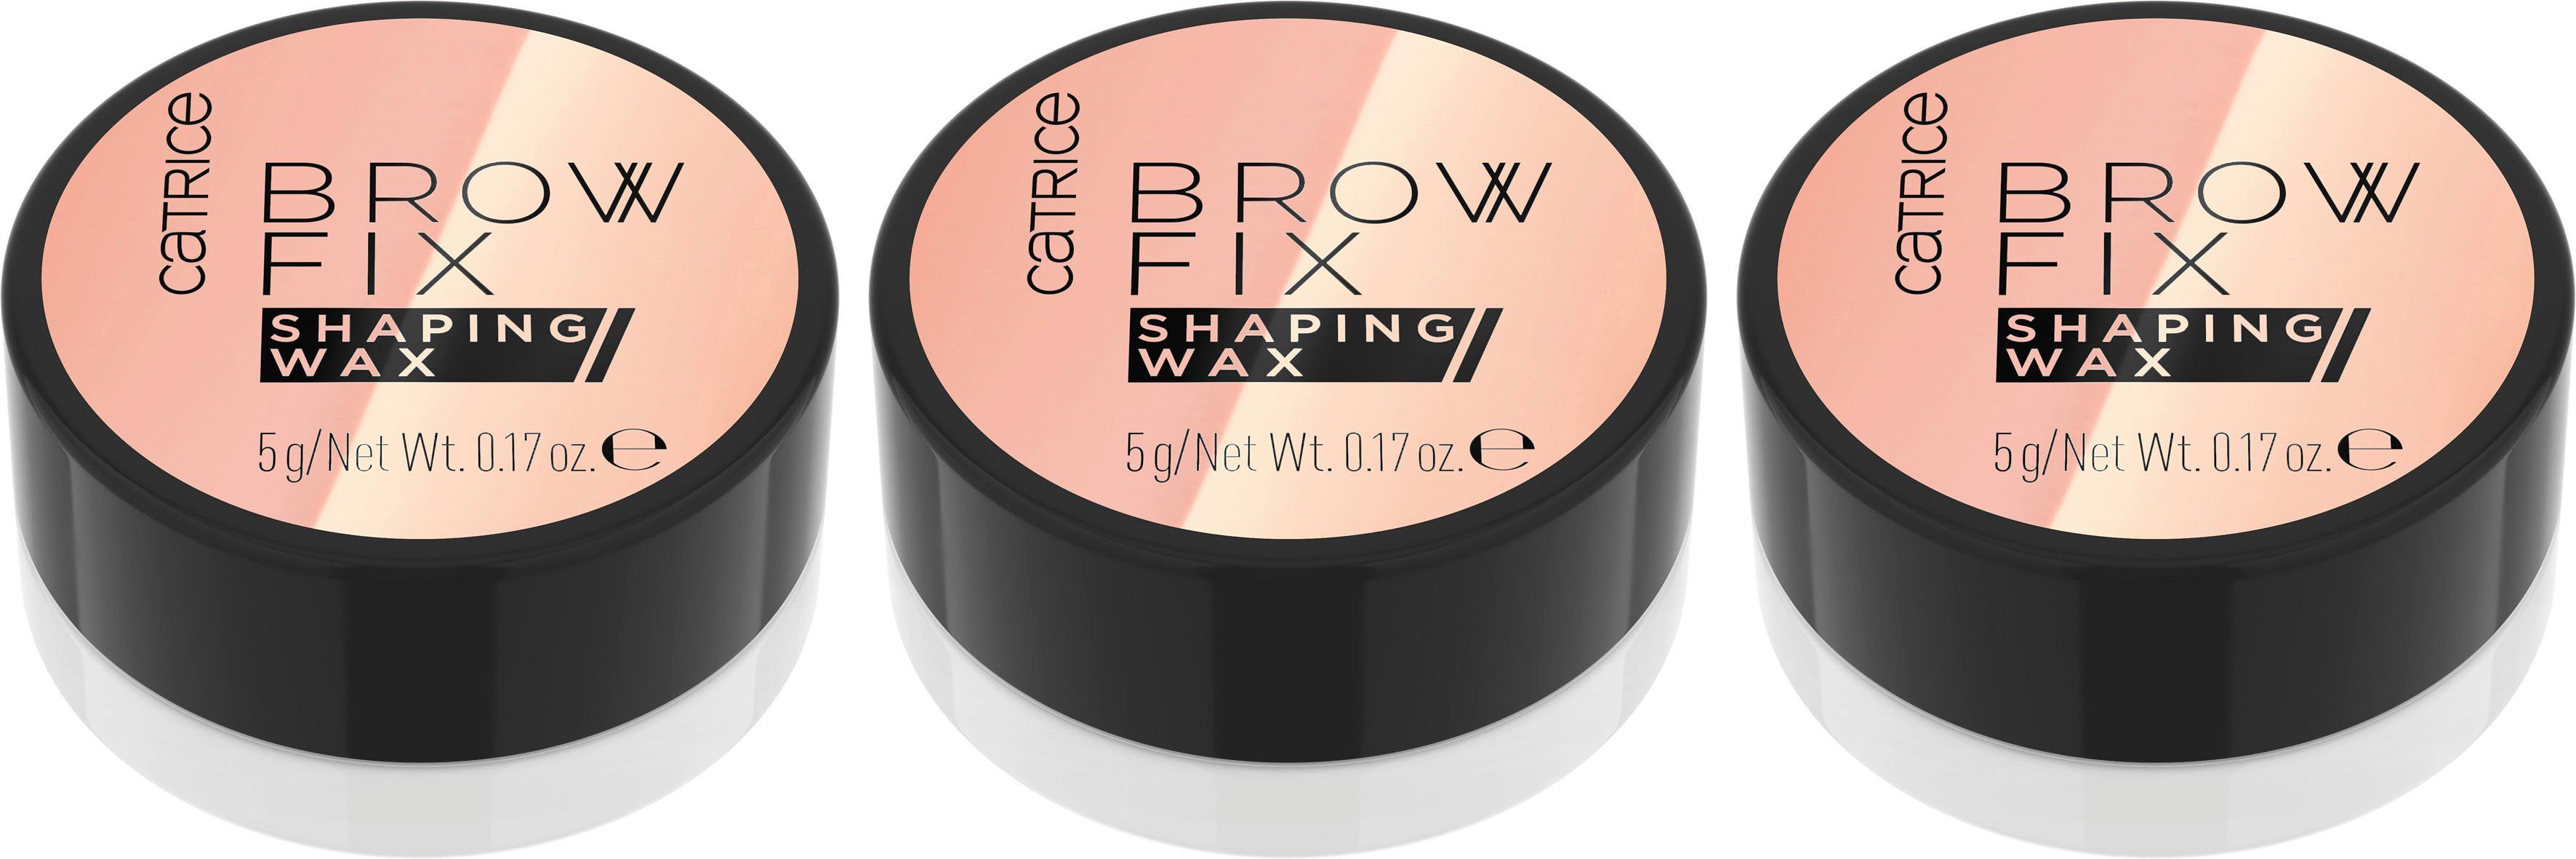 Catrice Augenbrauen-Gel Catrice Brow Fix Shaping Wax 010